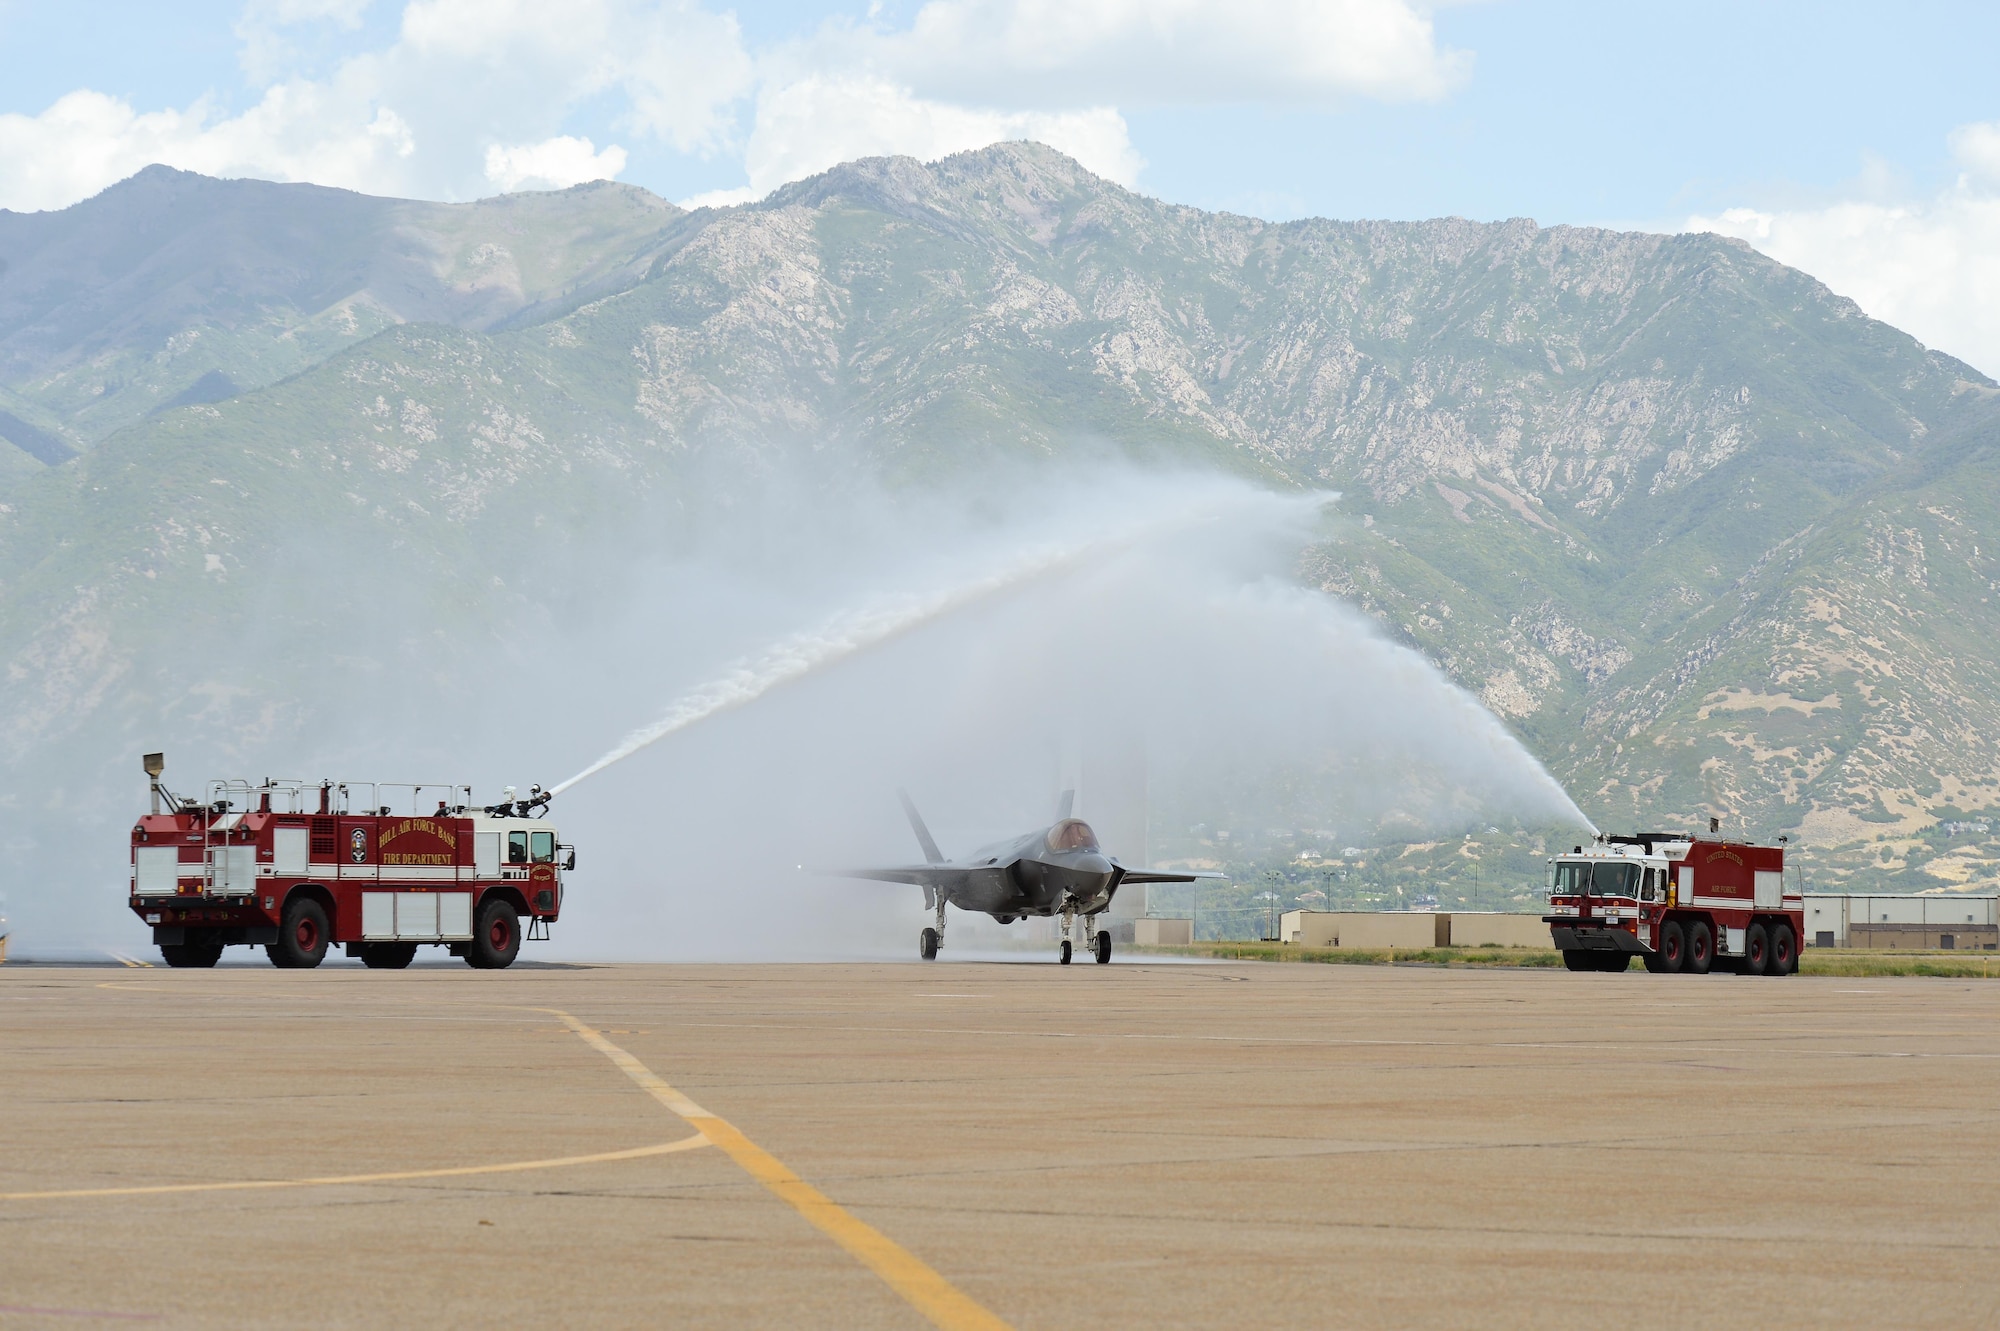 An F-35A Lightning II aircraft passes under a water arch at Hill Air Force Base, Utah, Sept. 2, 2015. The jet and another F-35A, the first of the Air Force’s newest fifth-generation fighter aircraft to arrive at the base, were delivered by Col. David Lyons, 388th Fighter Wing commander, and Lt. Col. Yosef Morris, 34th Fighter Squadron director of operations. The rest of the fleet of up to 72 F-35s will be coming in on a staggered basis through 2019. The 388th and 419th Fighter Wings at Hill were selected as the first Air Force units to fly combat-coded F-35s. (U.S. Air Force photo by R. Nial Bradshaw/Released))